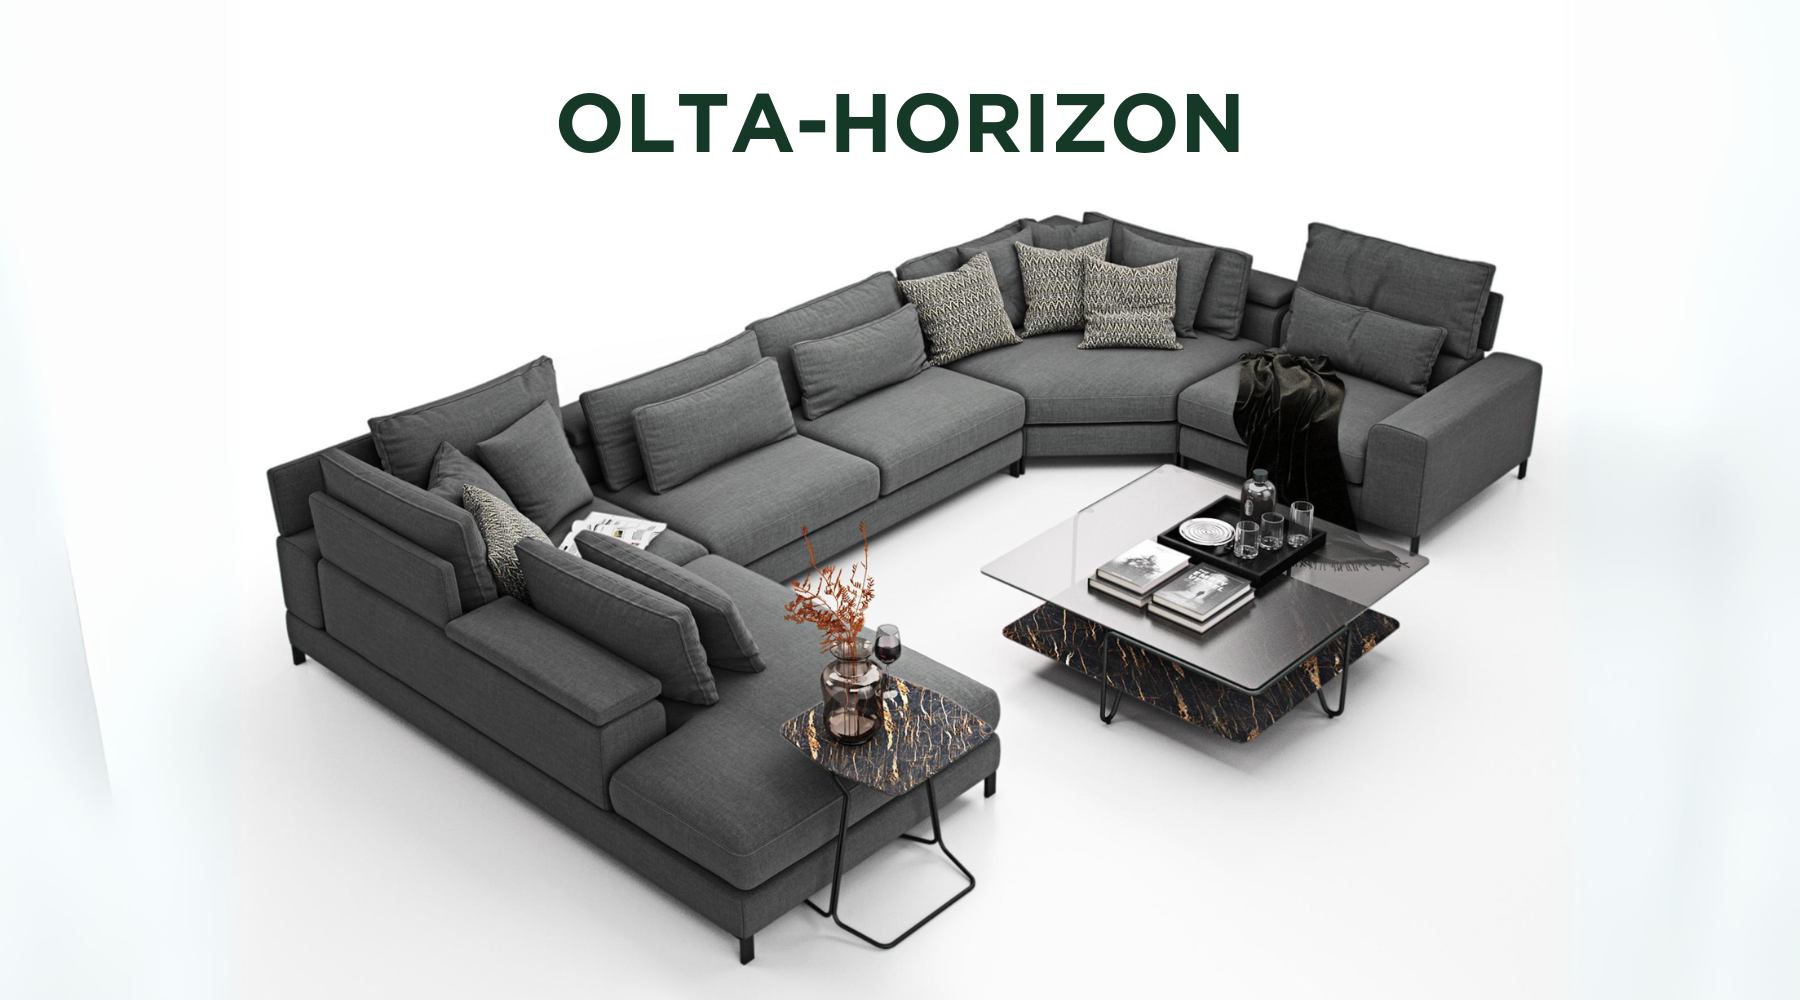 OLTA: The Art of Crafting Furniture, Born from Belgian Passion